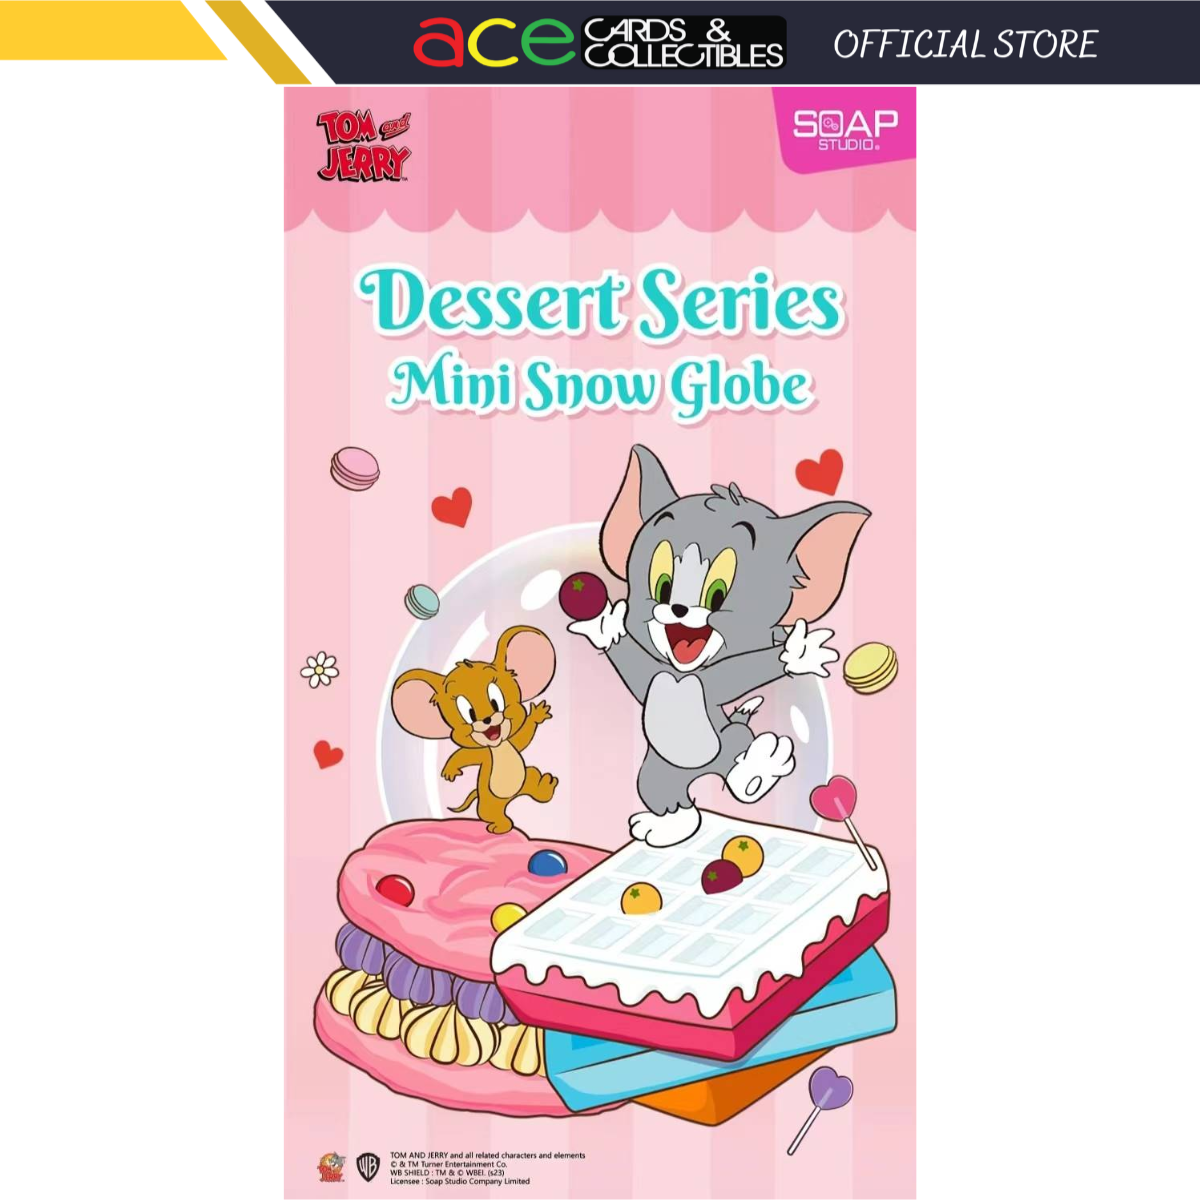 Tom And Jerry Mini Snow Globe Dessert Series-Single box-Soap Studio-Ace Cards & Collectibles